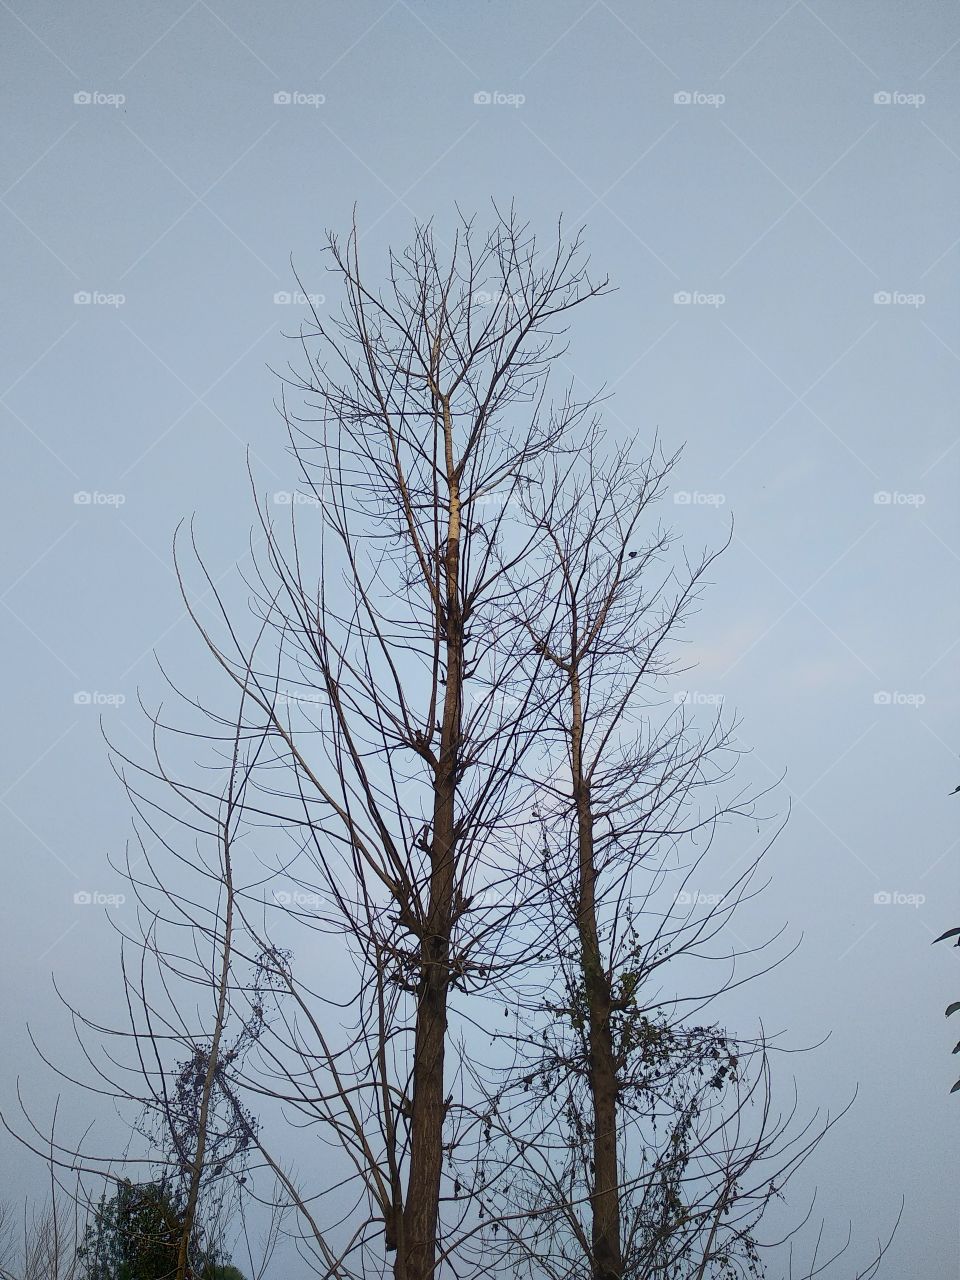 nature,environment,wood,branch,tree,nature,sky,silhouette,landscape,fog,cold,frost